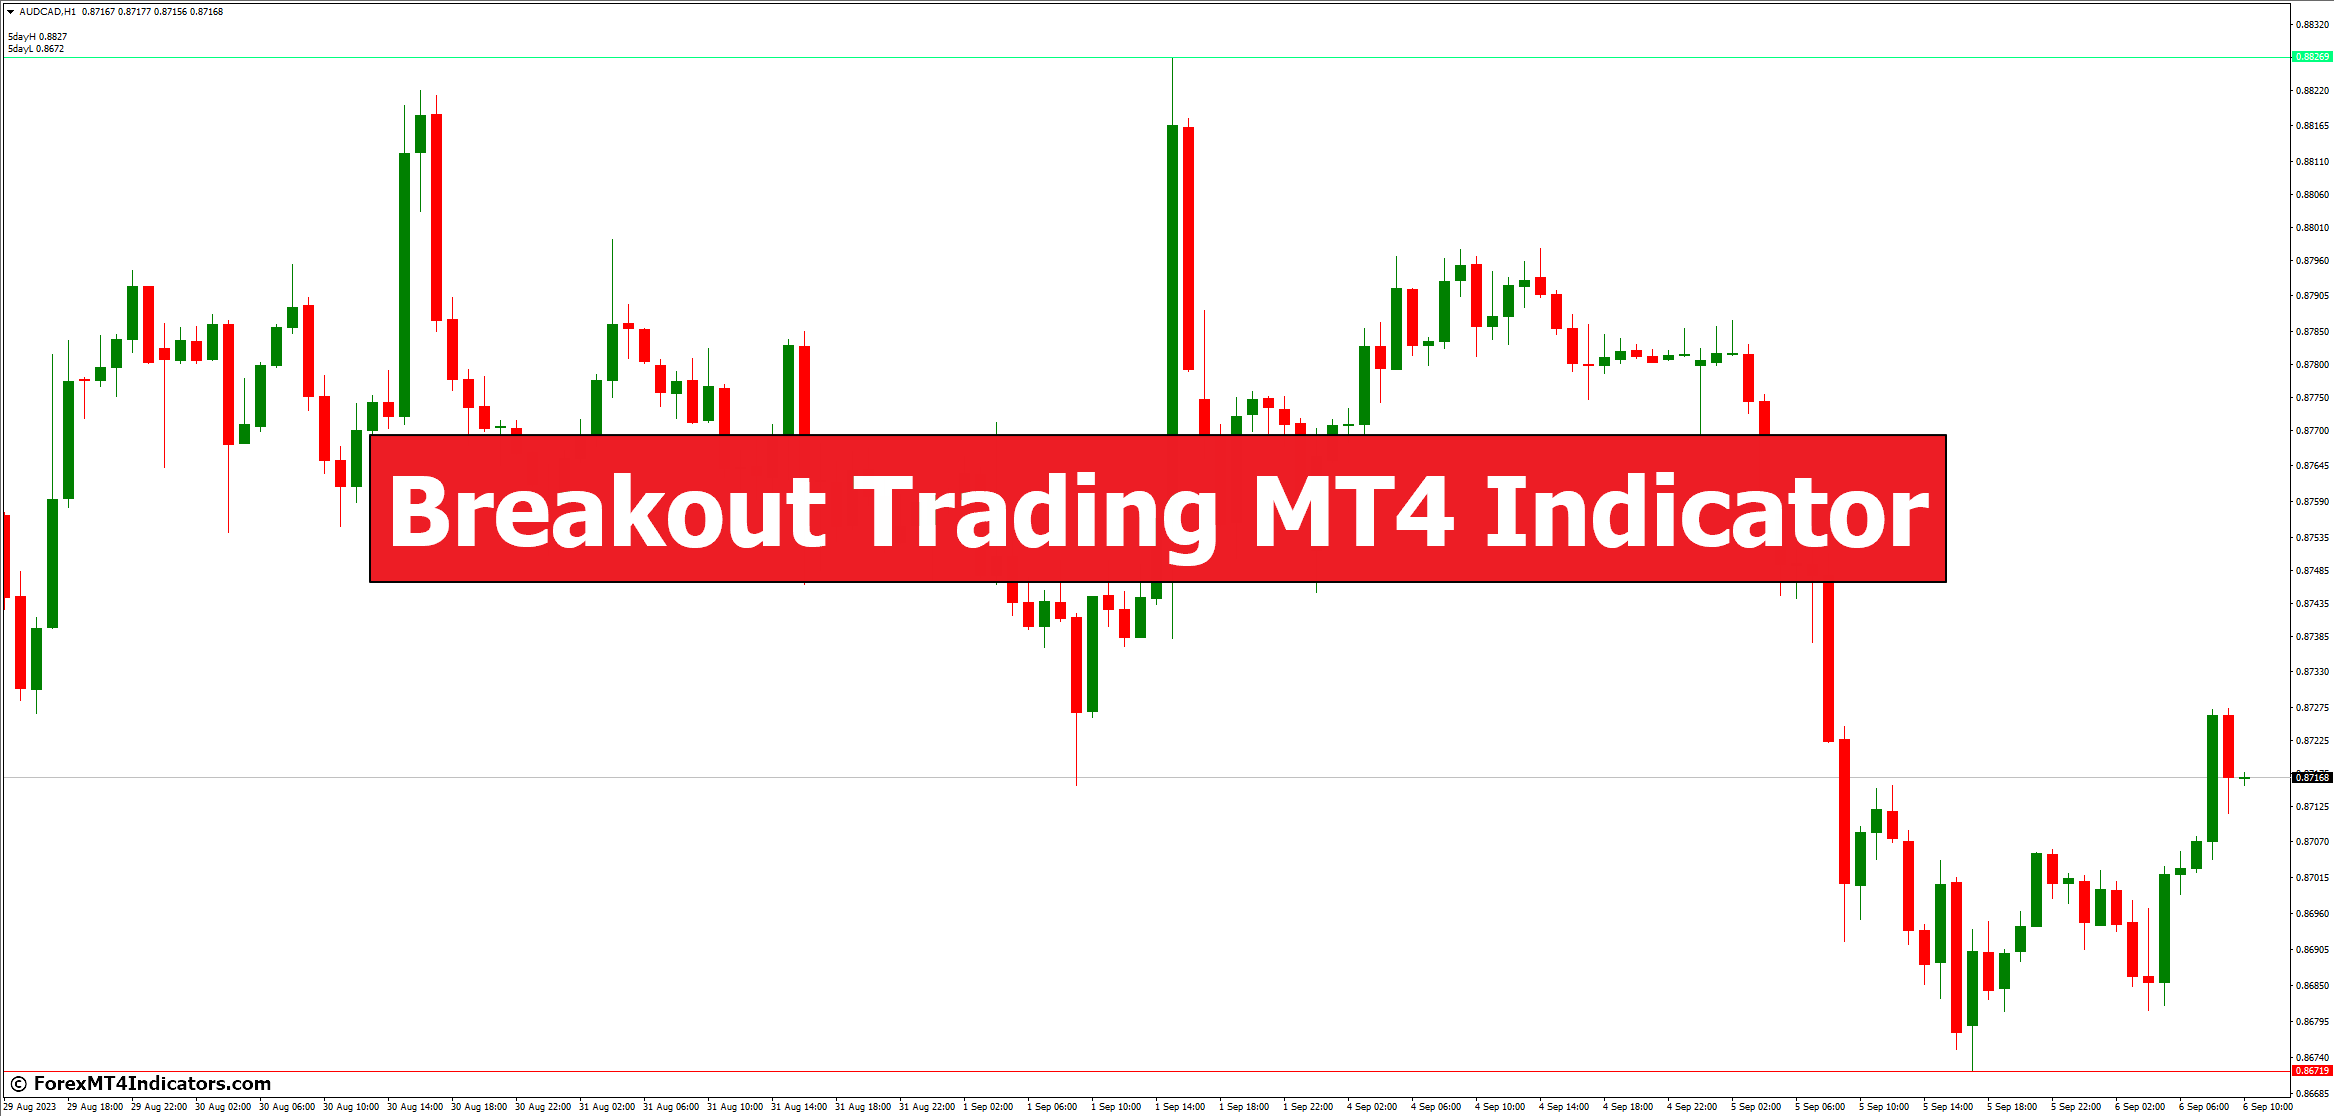 Breakout Trading MT4 Indicator